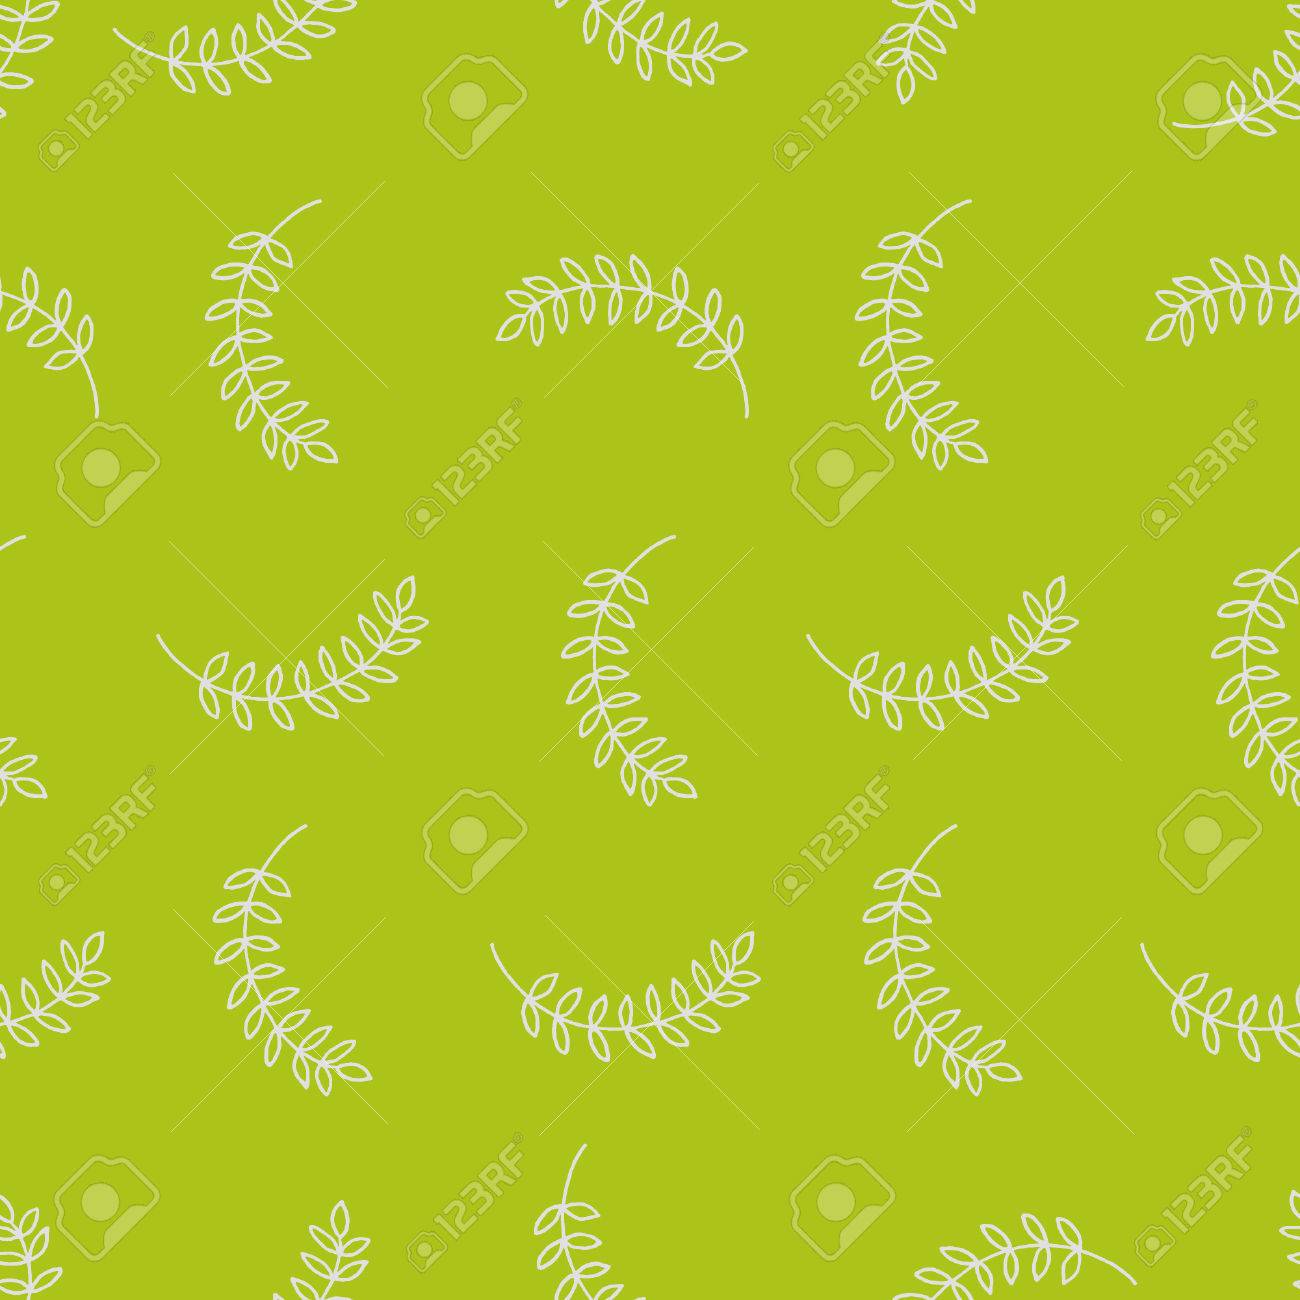 Seamless Pattern With Branches And Leaves On Chartreuse Background